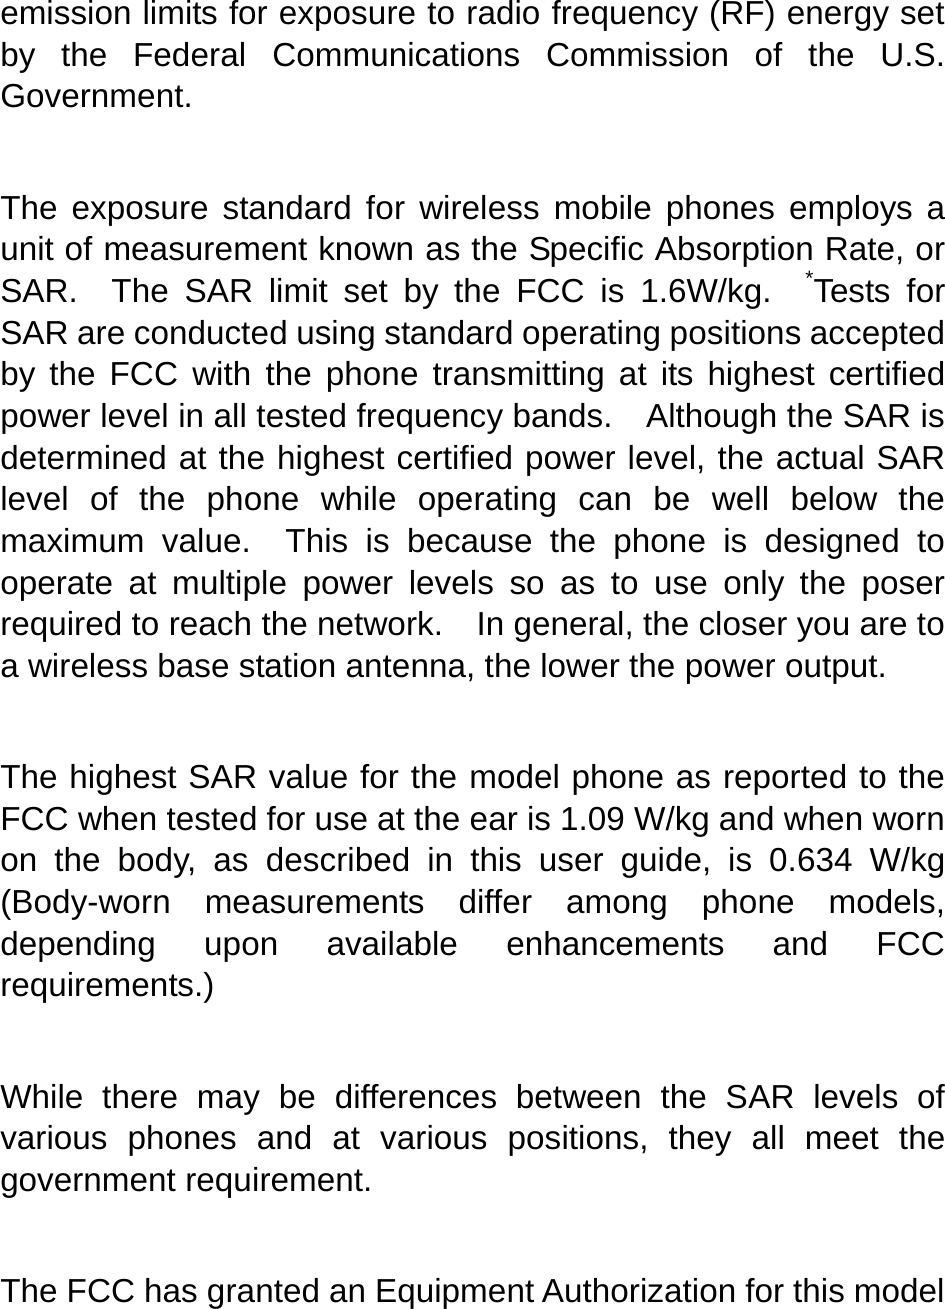   emission limits for exposure to radio frequency (RF) energy set by the Federal Communications Commission of the U.S. Government.    The exposure standard for wireless mobile phones employs a unit of measurement known as the Specific Absorption Rate, or SAR.  The SAR limit set by the FCC is 1.6W/kg.  *Tests for SAR are conducted using standard operating positions accepted by the FCC with the phone transmitting at its highest certified power level in all tested frequency bands.    Although the SAR is determined at the highest certified power level, the actual SAR level of the phone while operating can be well below the maximum value.  This is because the phone is designed to operate at multiple power levels so as to use only the poser required to reach the network.    In general, the closer you are to a wireless base station antenna, the lower the power output.  The highest SAR value for the model phone as reported to the FCC when tested for use at the ear is 1.09 W/kg and when worn on the body, as described in this user guide, is 0.634 W/kg (Body-worn measurements differ among phone models, depending upon available enhancements and FCC requirements.)  While there may be differences between the SAR levels of various phones and at various positions, they all meet the government requirement.  The FCC has granted an Equipment Authorization for this model 